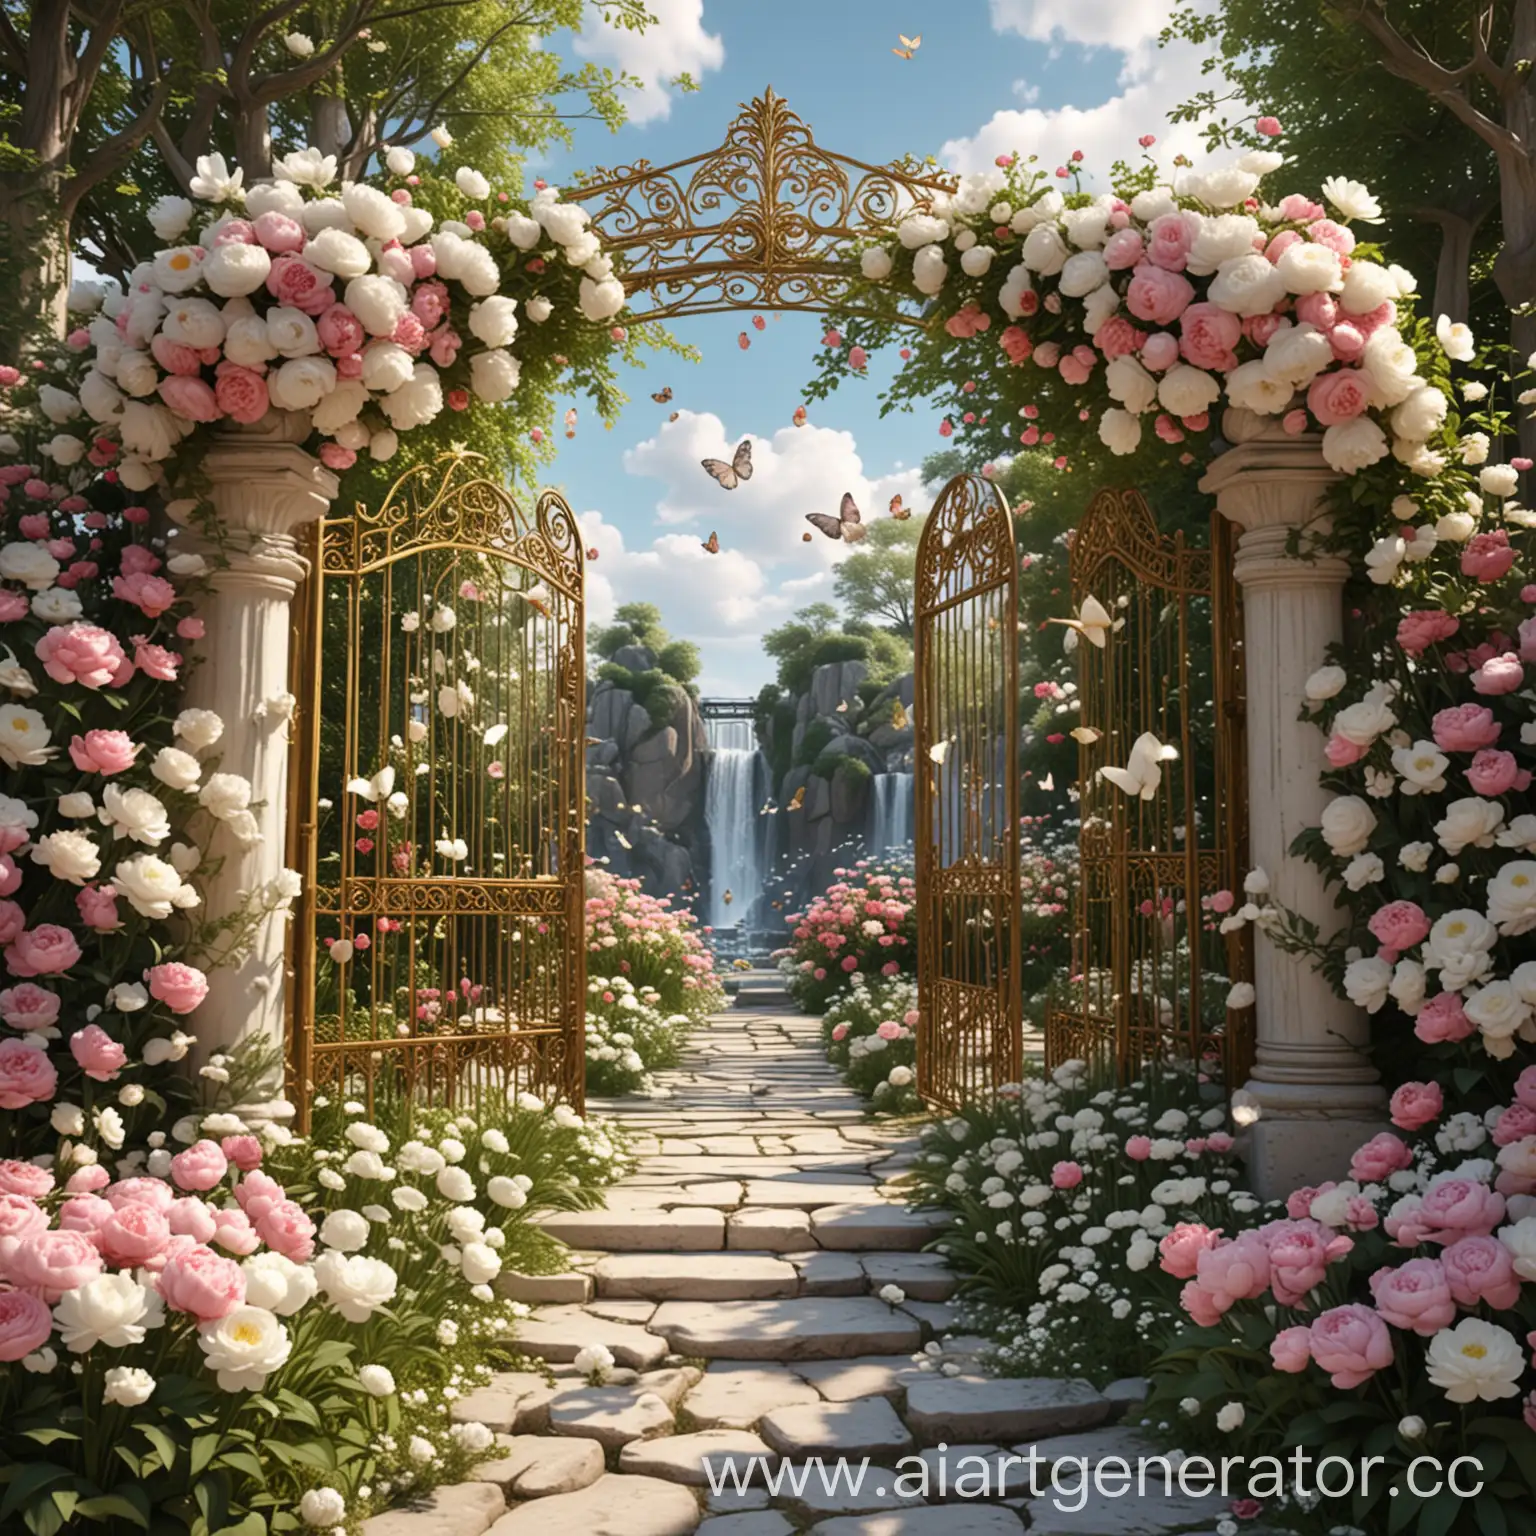 Make a heaven garden with the golden Gates with the  huge title Luxury ,with white butterflies full of white and pink peonies and ranunculus and waterfalls , make it with 8k and best ever quality and most realistic ever